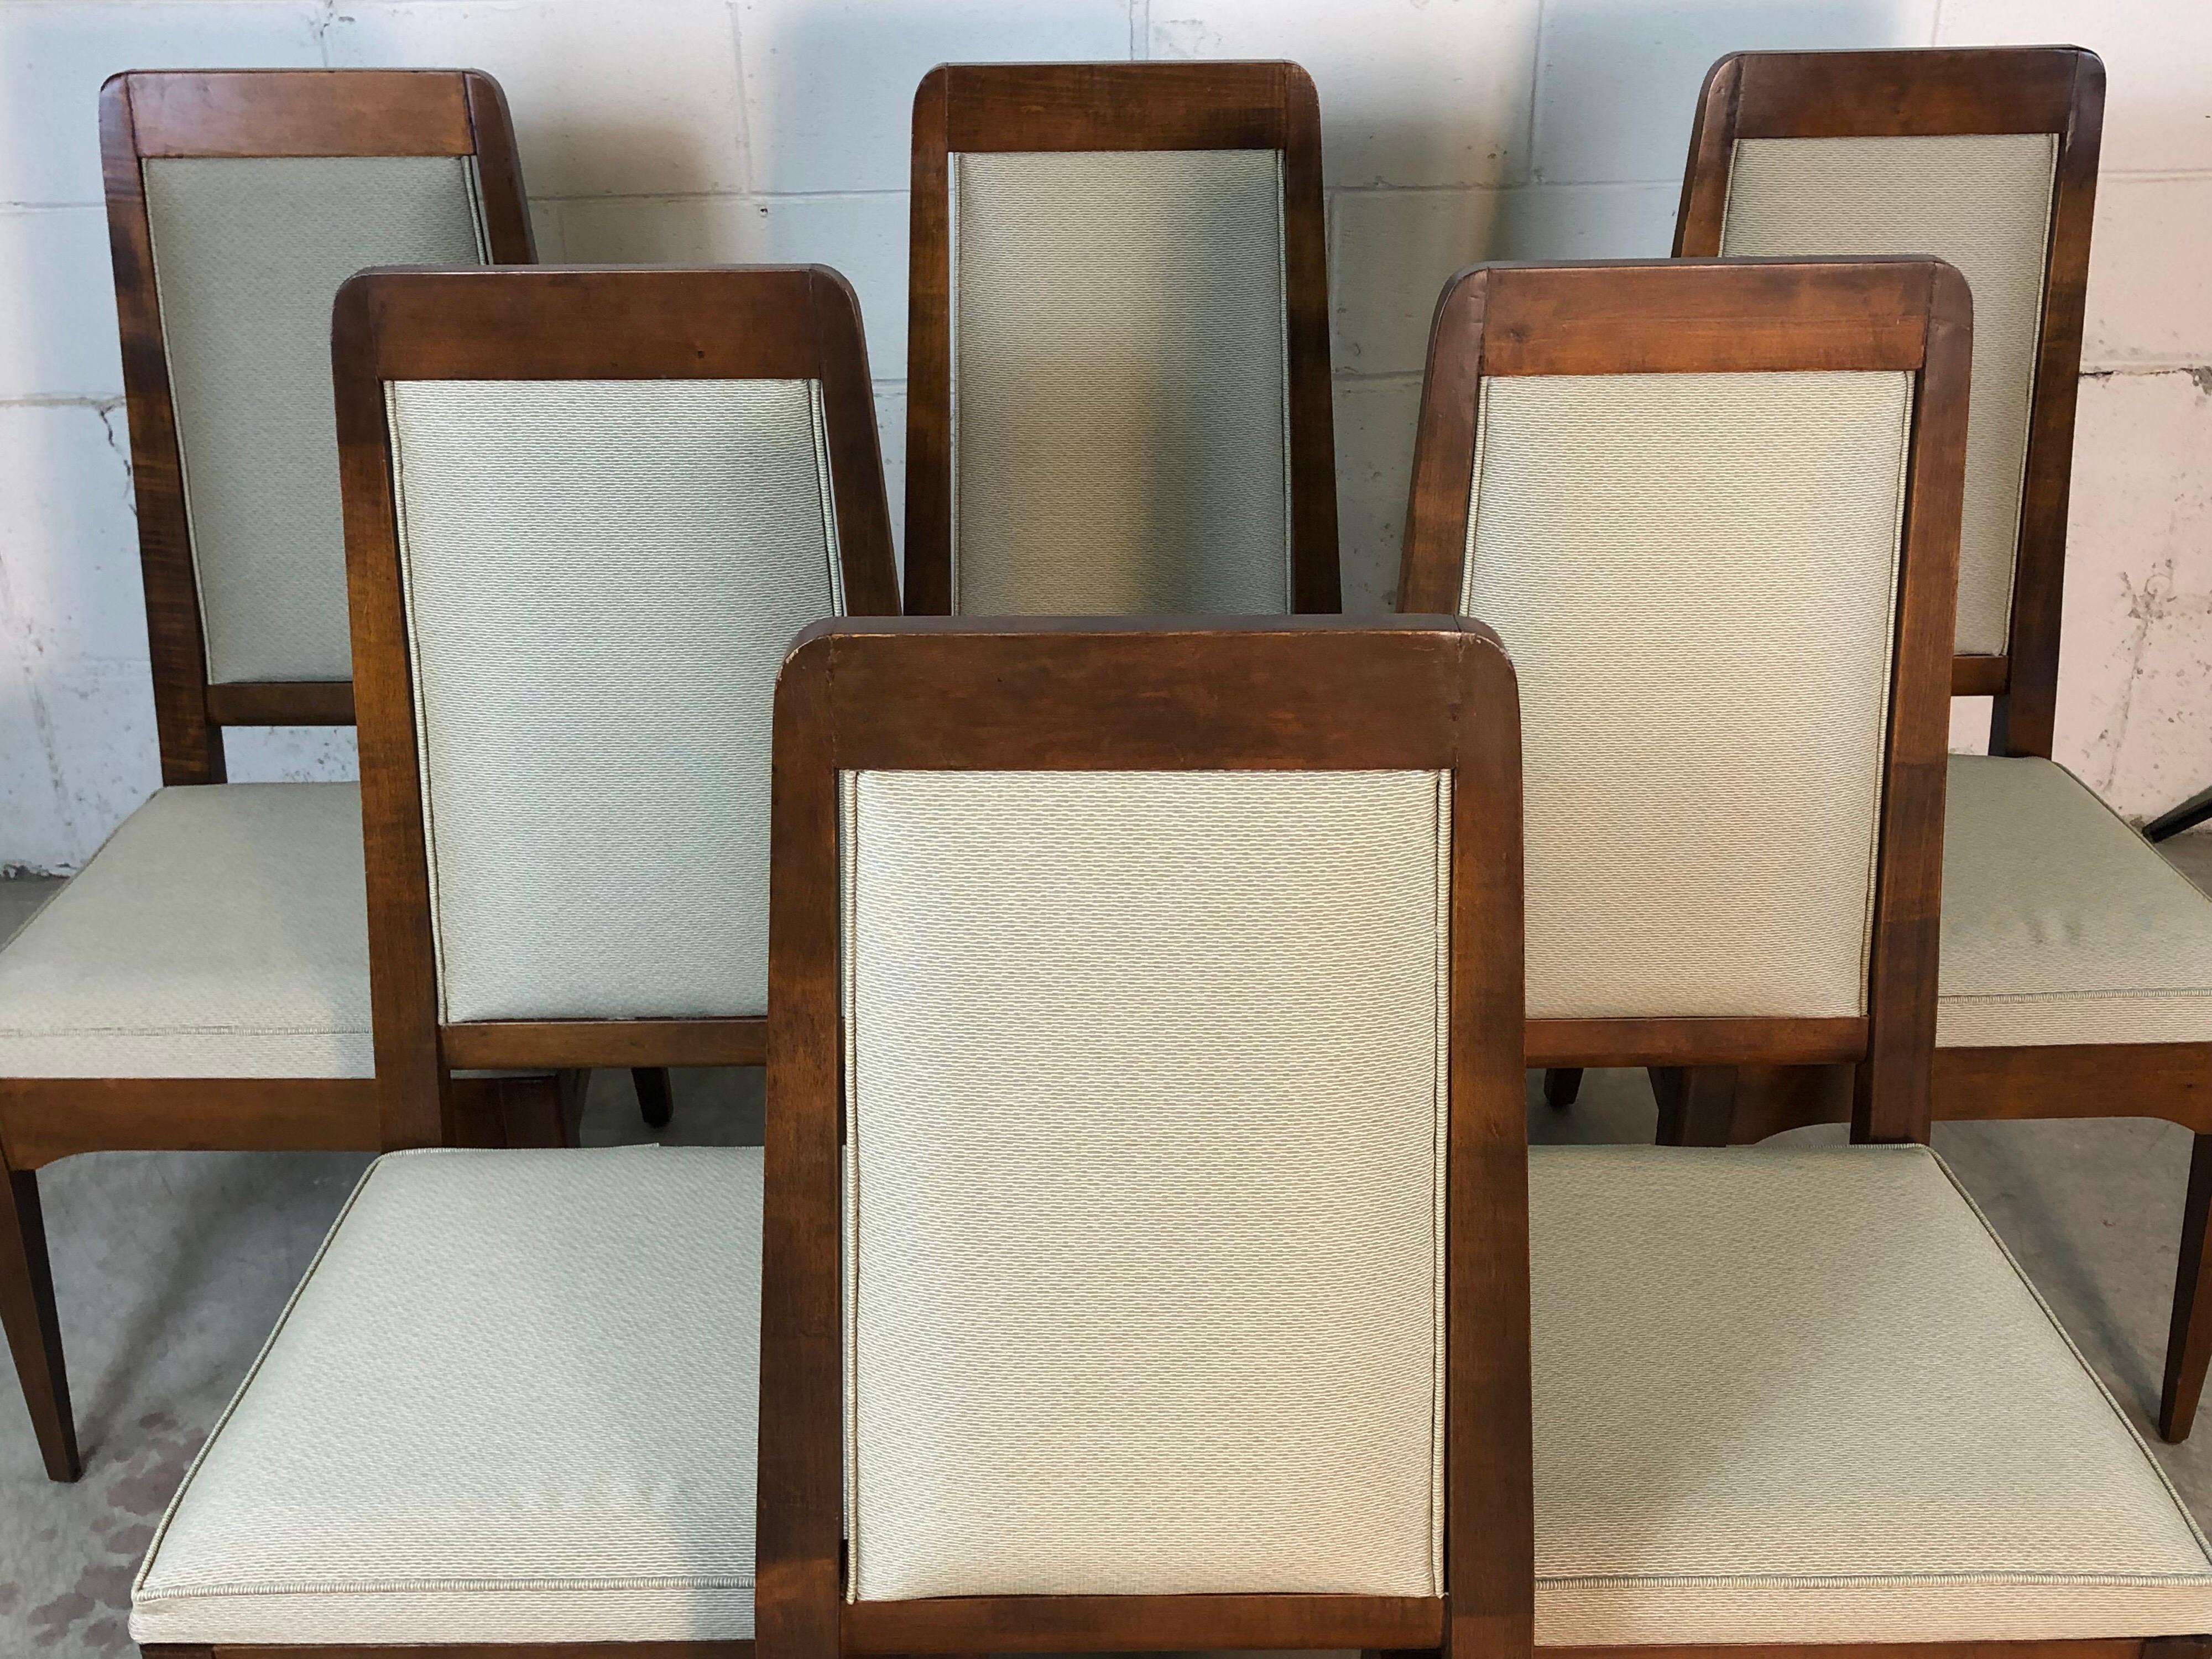 Mid-Century Modern 1960s set of 6 high back maple wood dining chairs with new reupholstered fabric and stainless steel accents. The patterned fabric is gray in color. The chairs have also been refinished and are sturdy. They are marked Made in